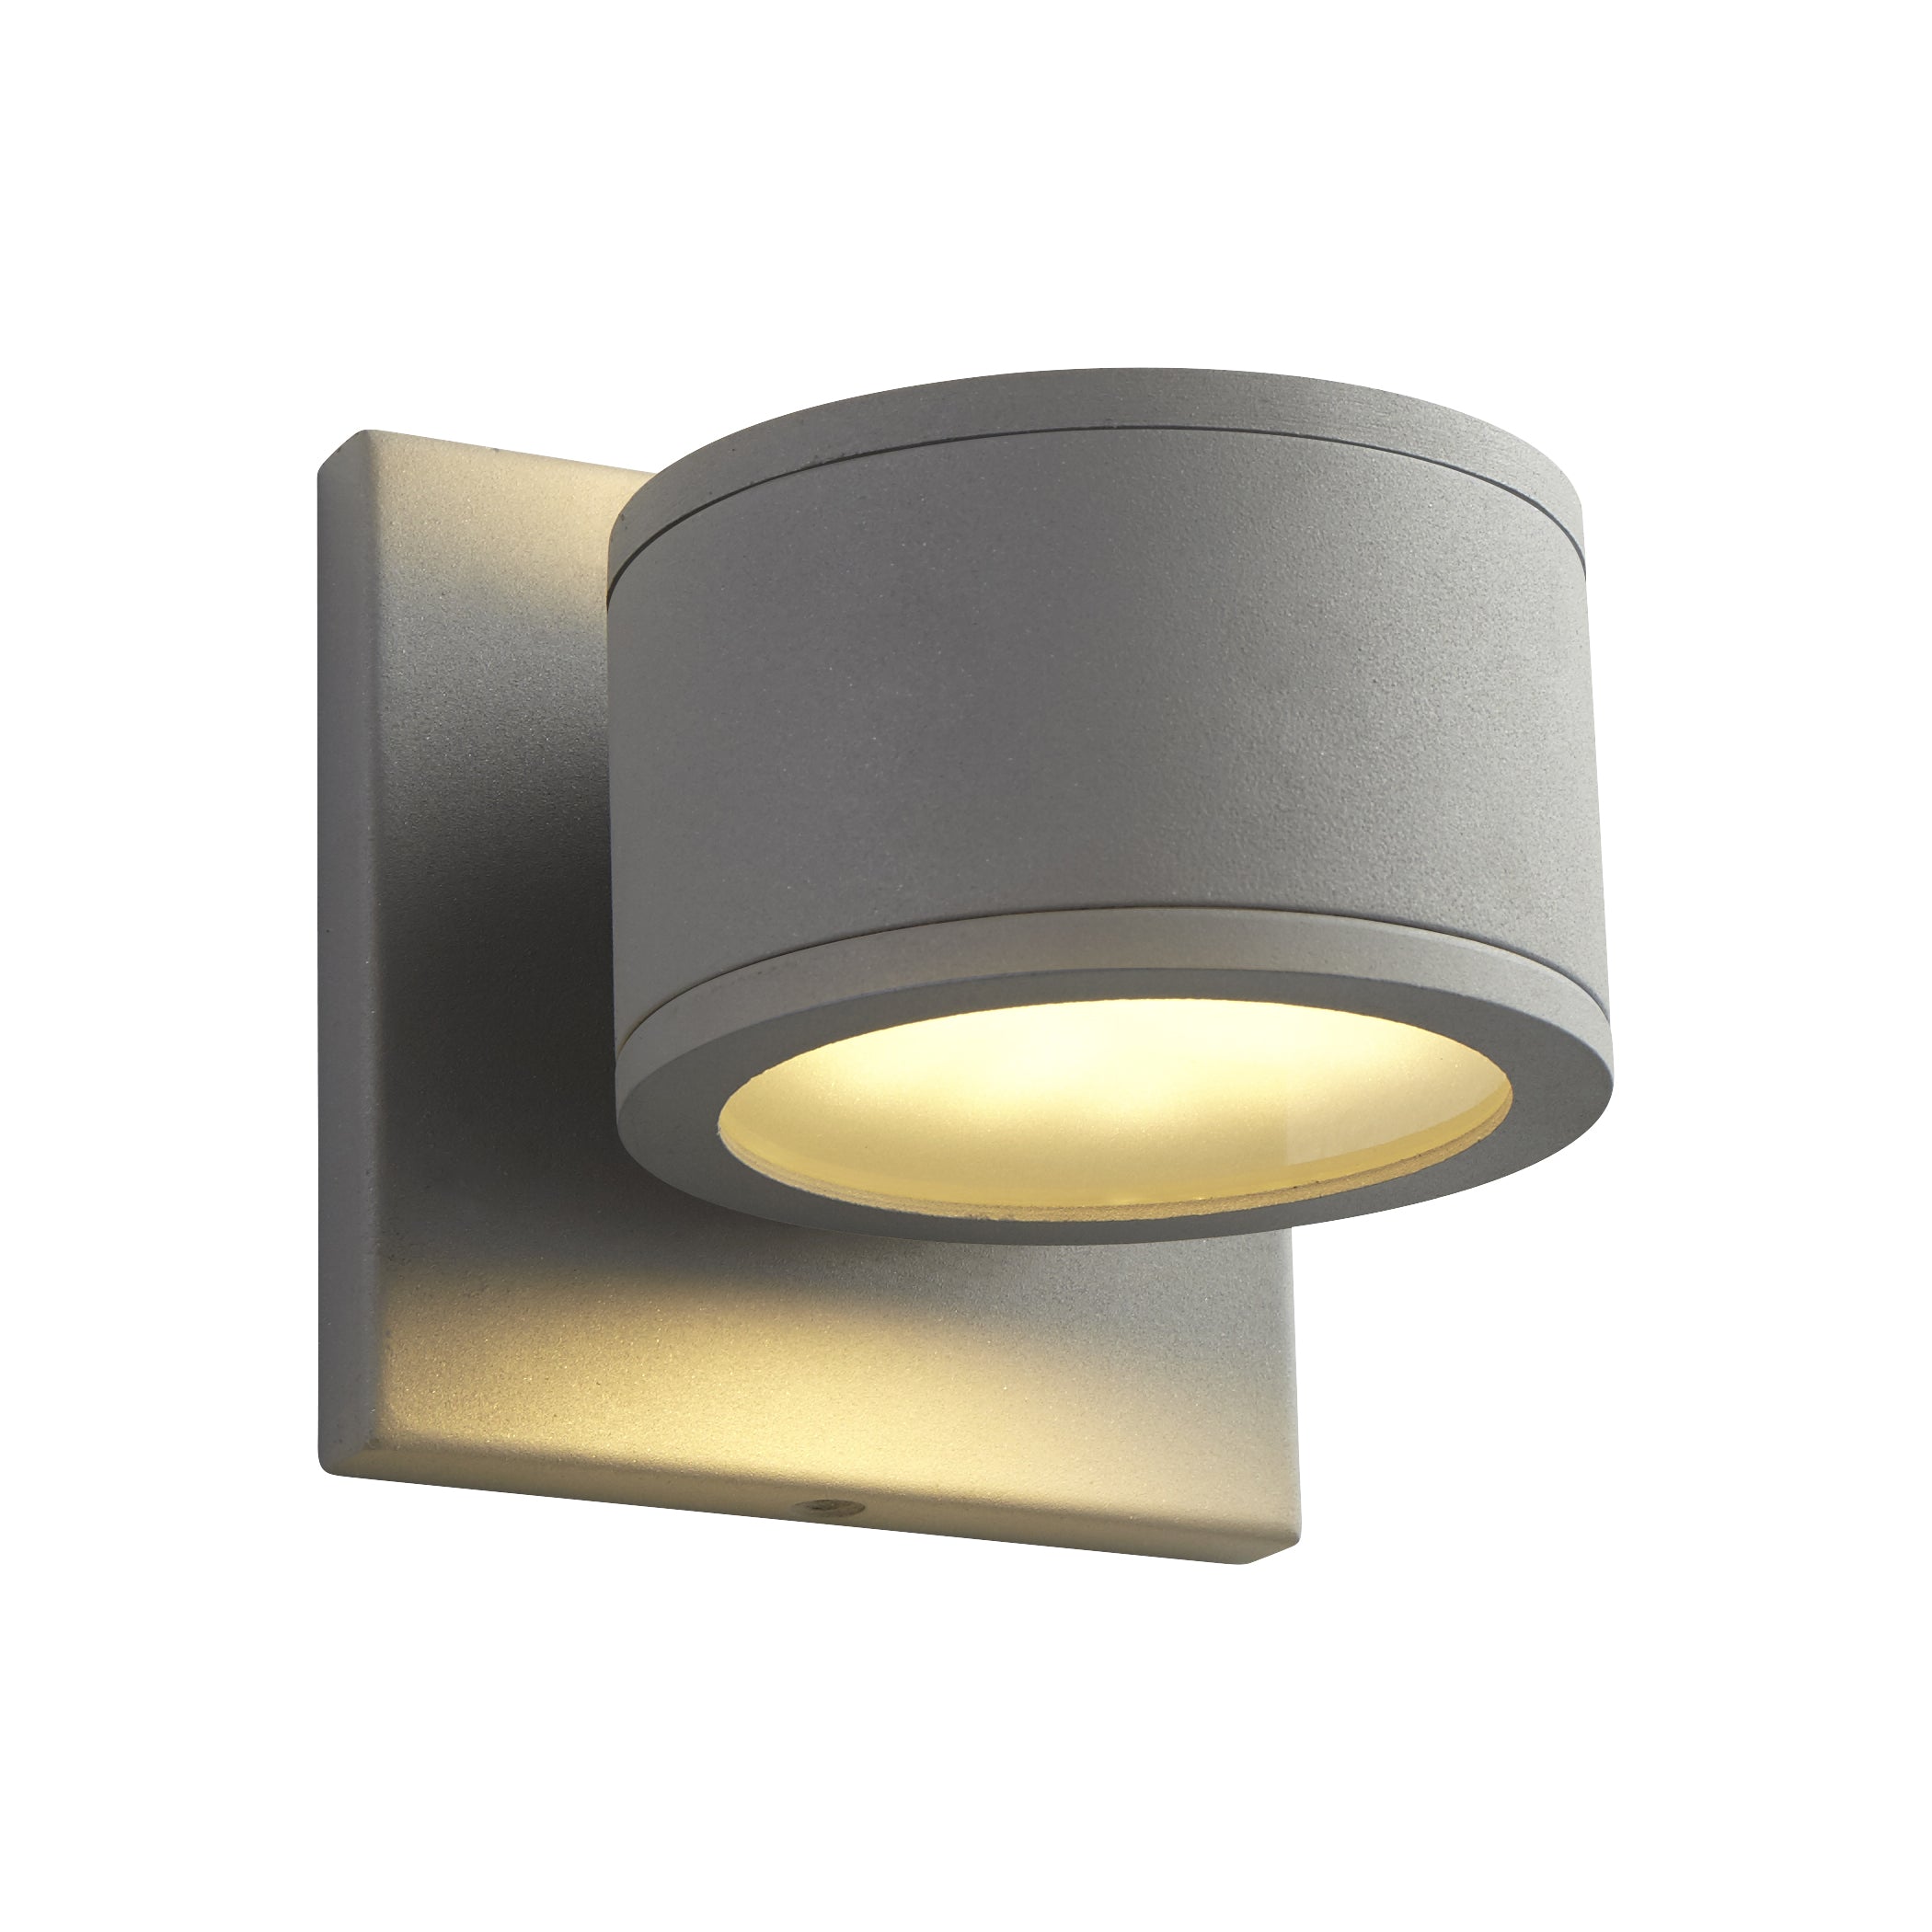 Oxygen Ceres 3-727-16 Outdoor Wall Sconce Light - Grey